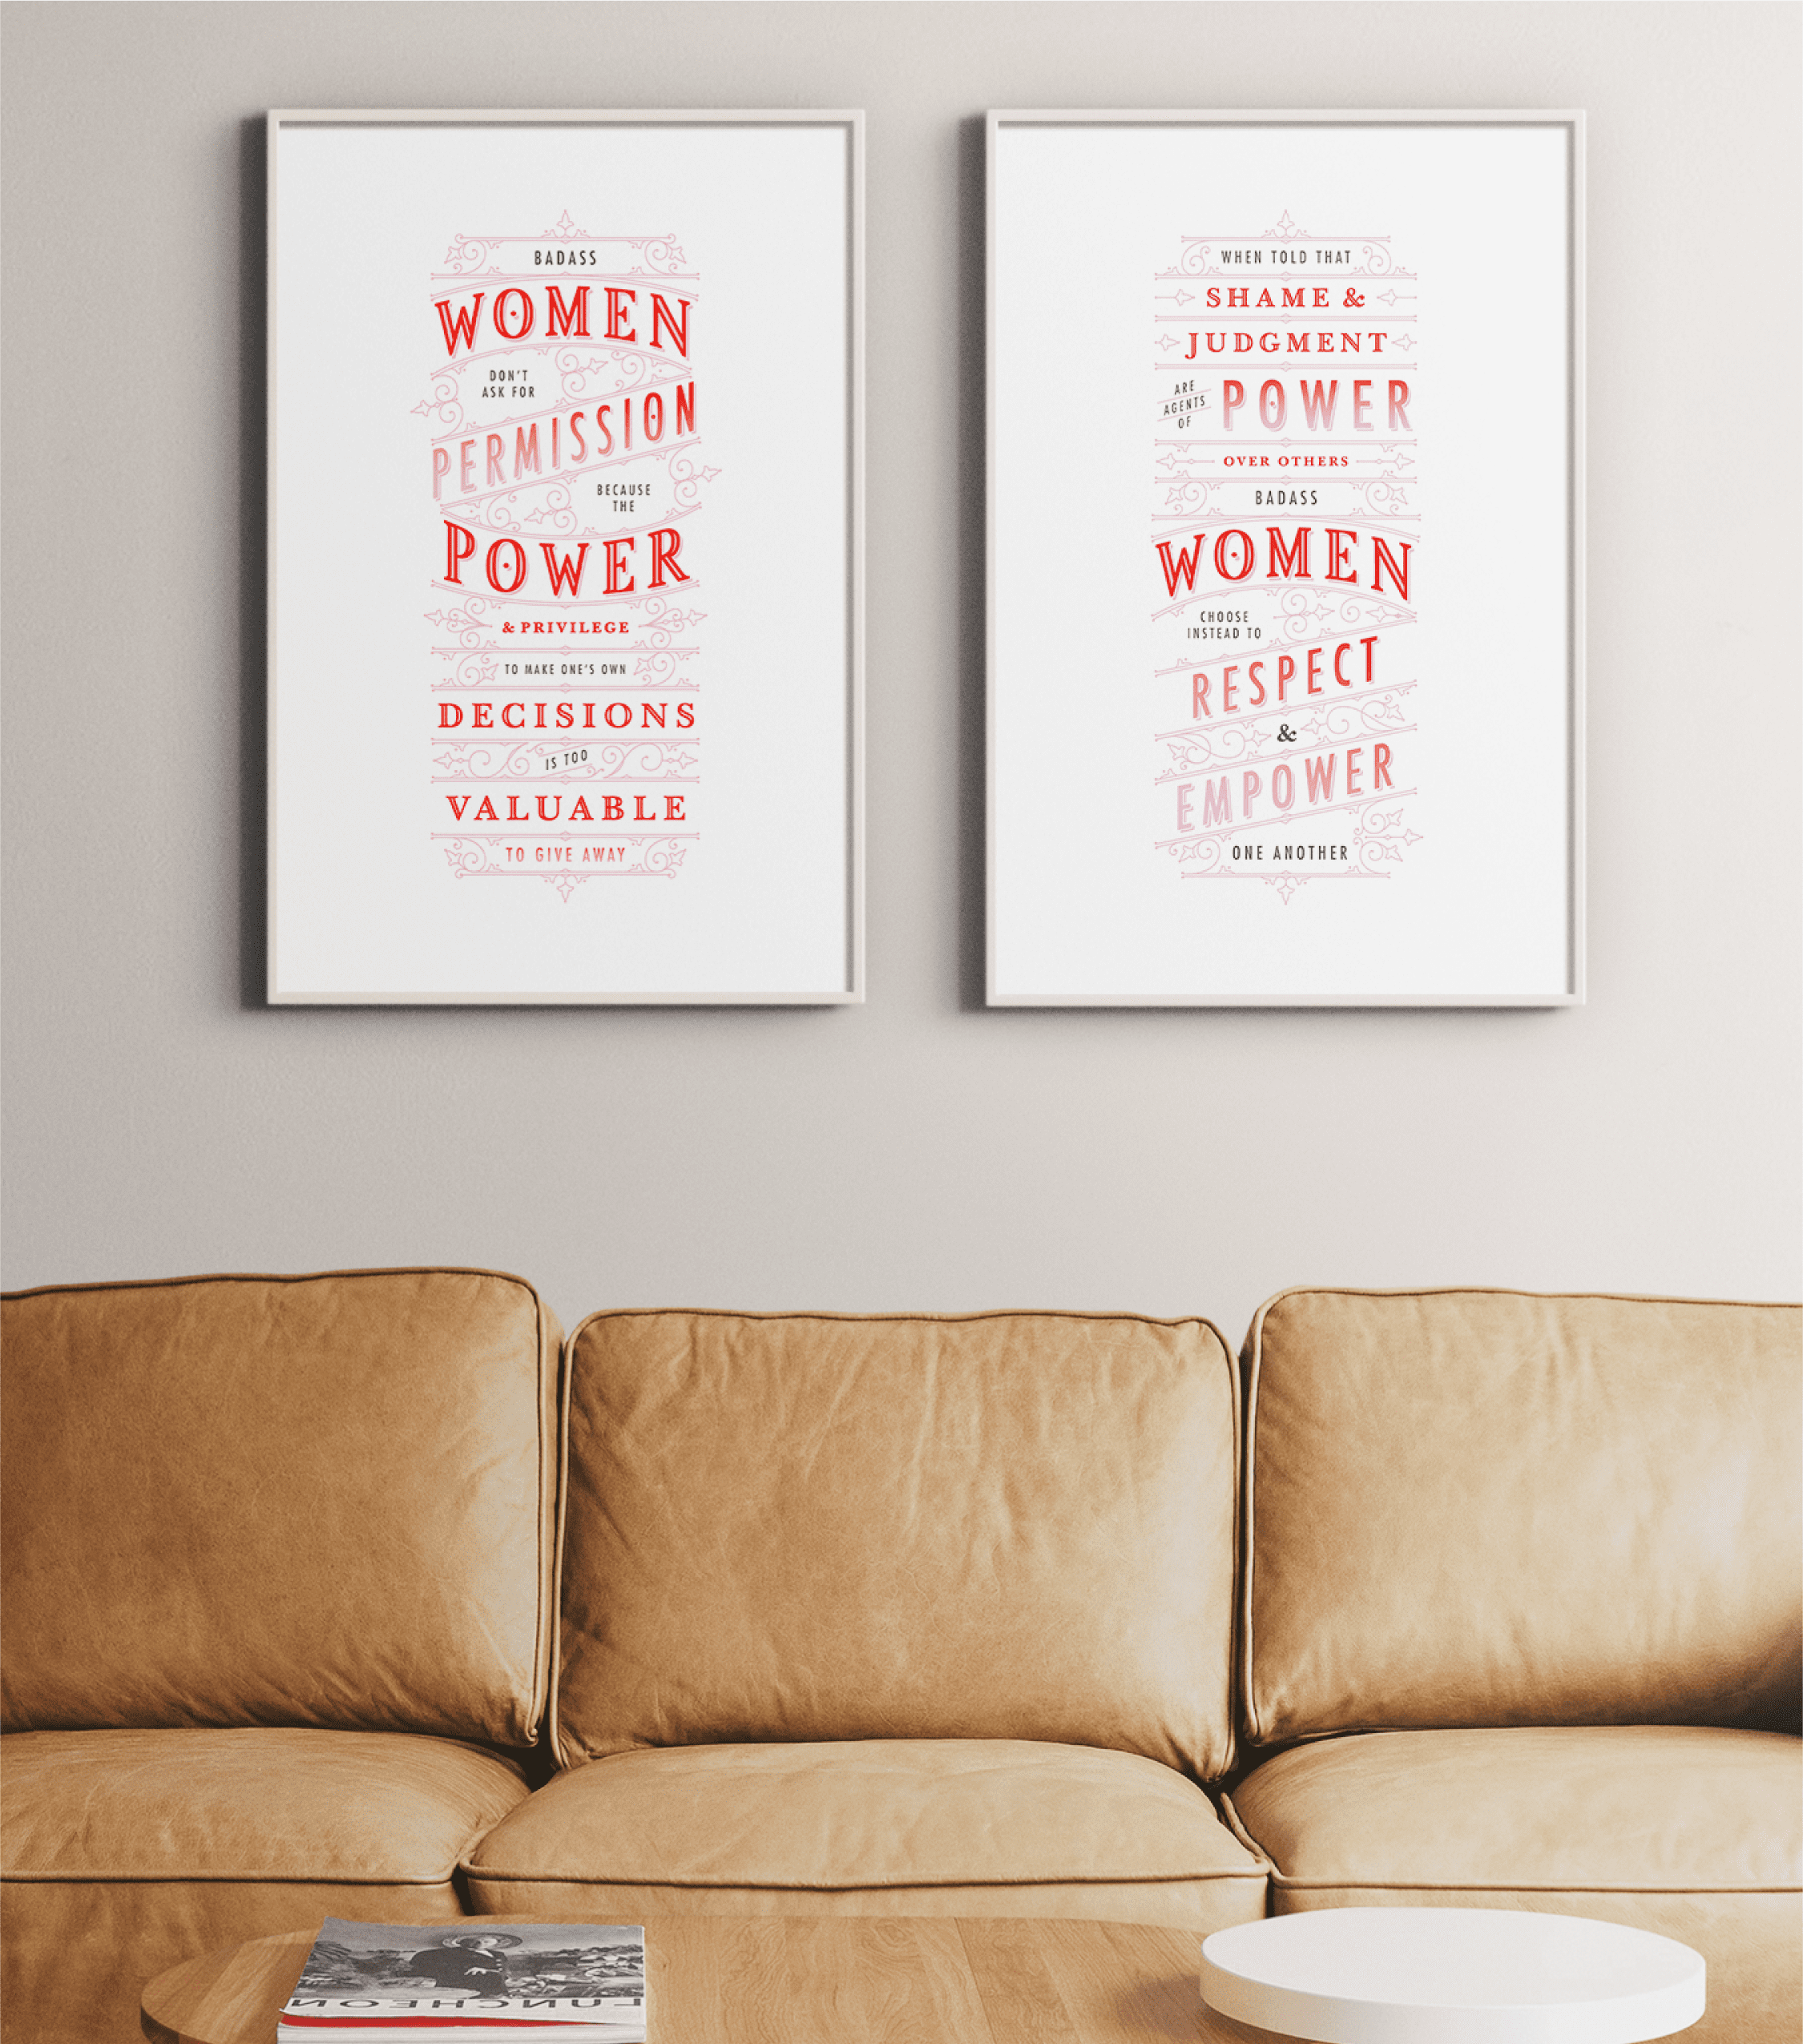 badass women quote downloadable art print collection with red and pink hand-lettering to empower the female community